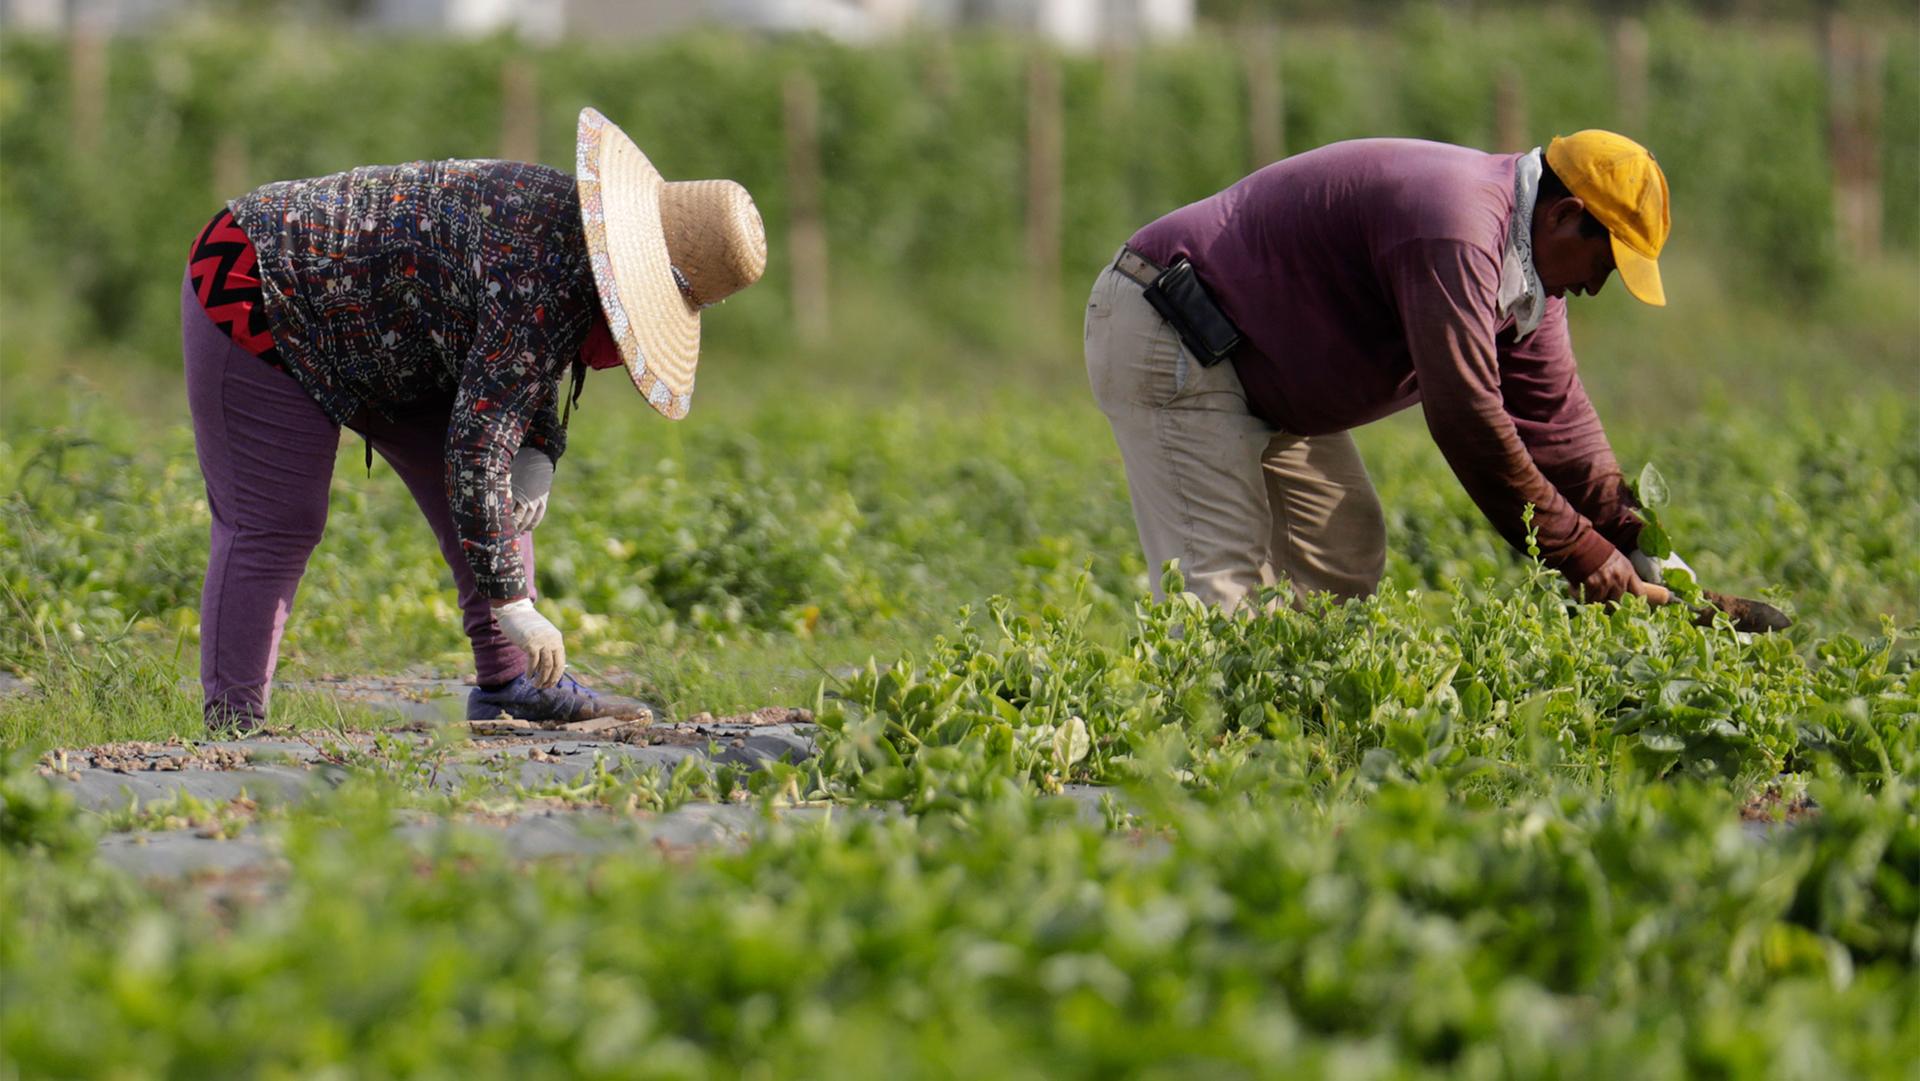 Farmworkers wearing hats gather spinach from a field.